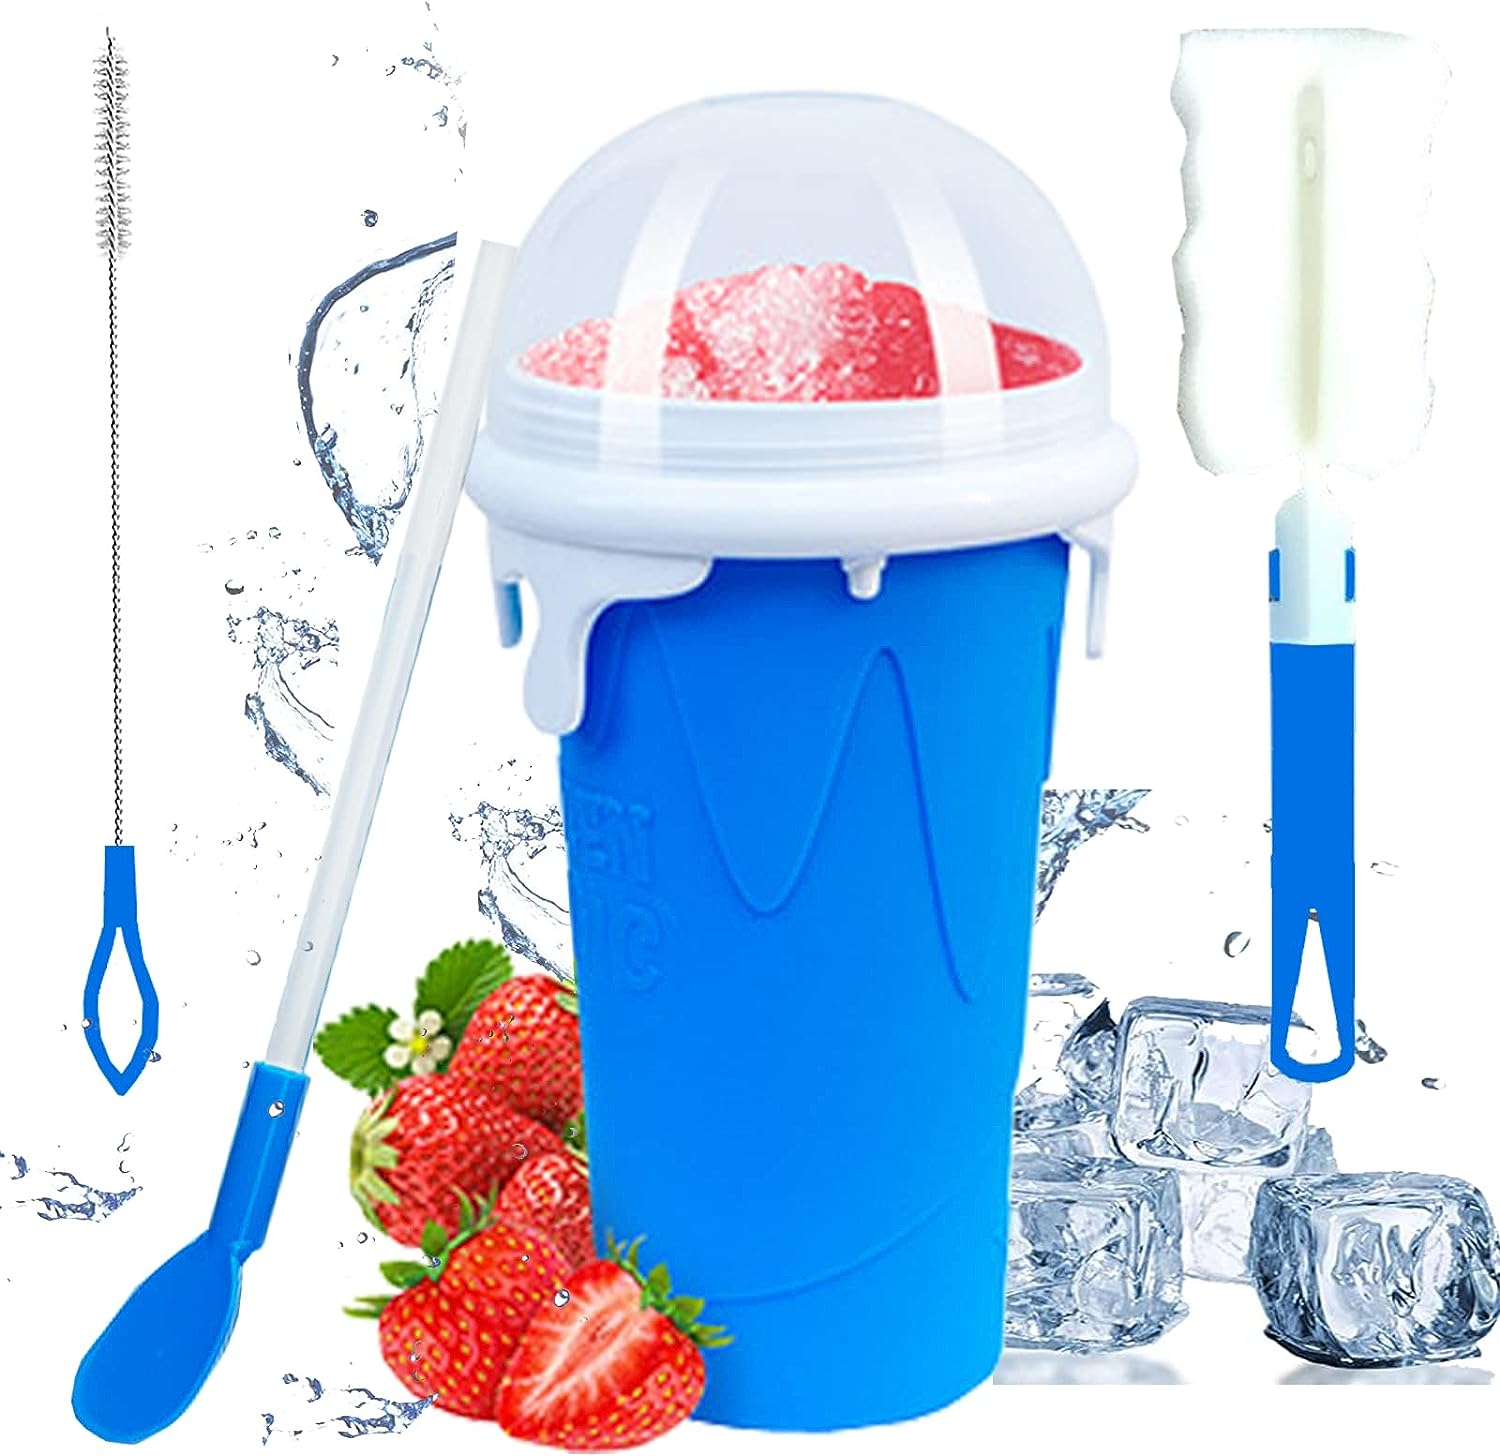 Ekezon Slush Cup, Slushy Maker Silicone Squeeze Cup Slush Ice Cup for Kneading DIY Slushie Maker Cup Smoothie Cup Summer Slush Cup with 2 in 1 Straw Spoon for Delicious Slush (Blue)